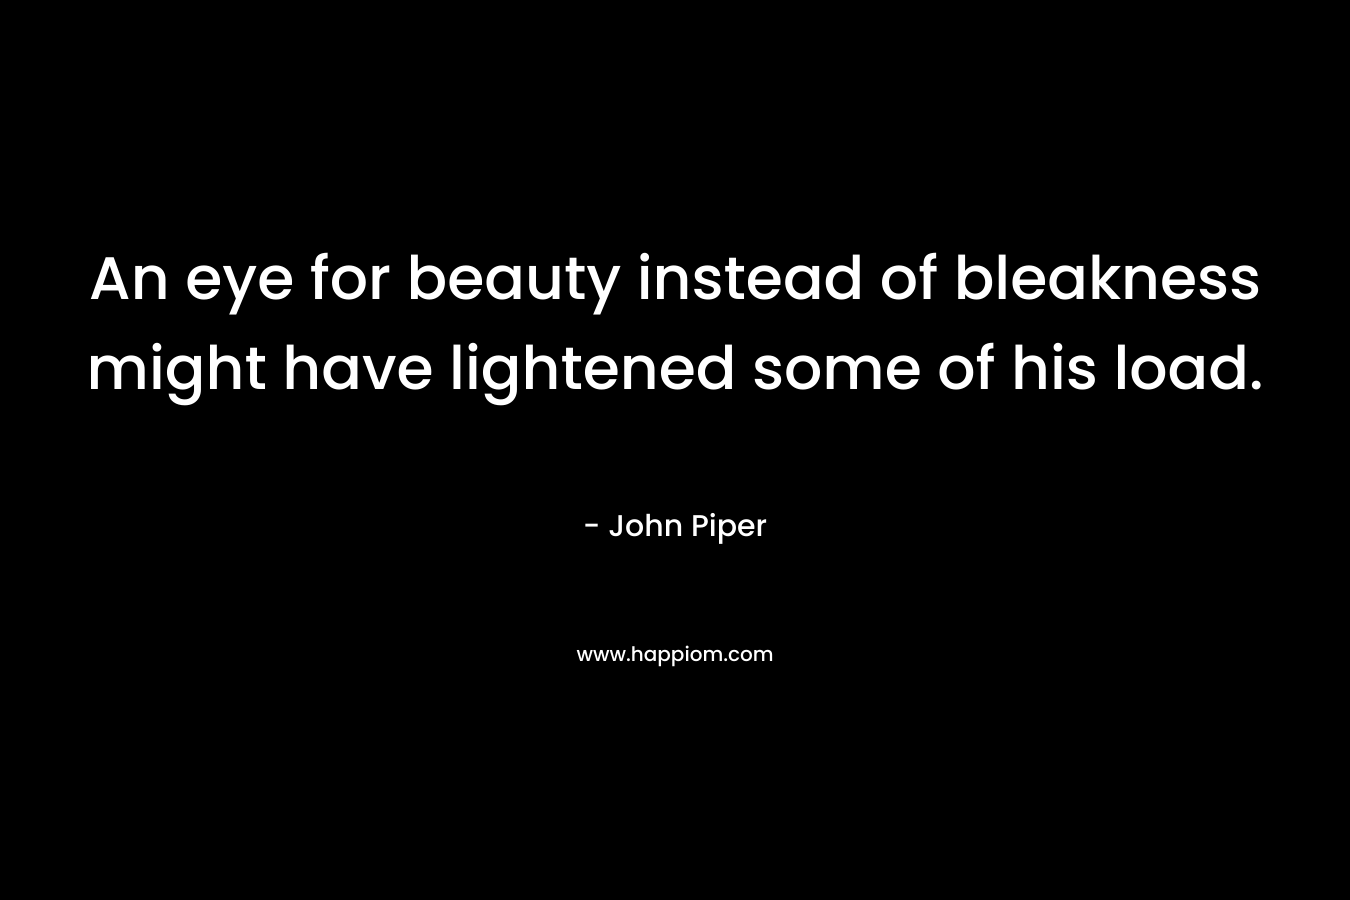 An eye for beauty instead of bleakness might have lightened some of his load. – John Piper